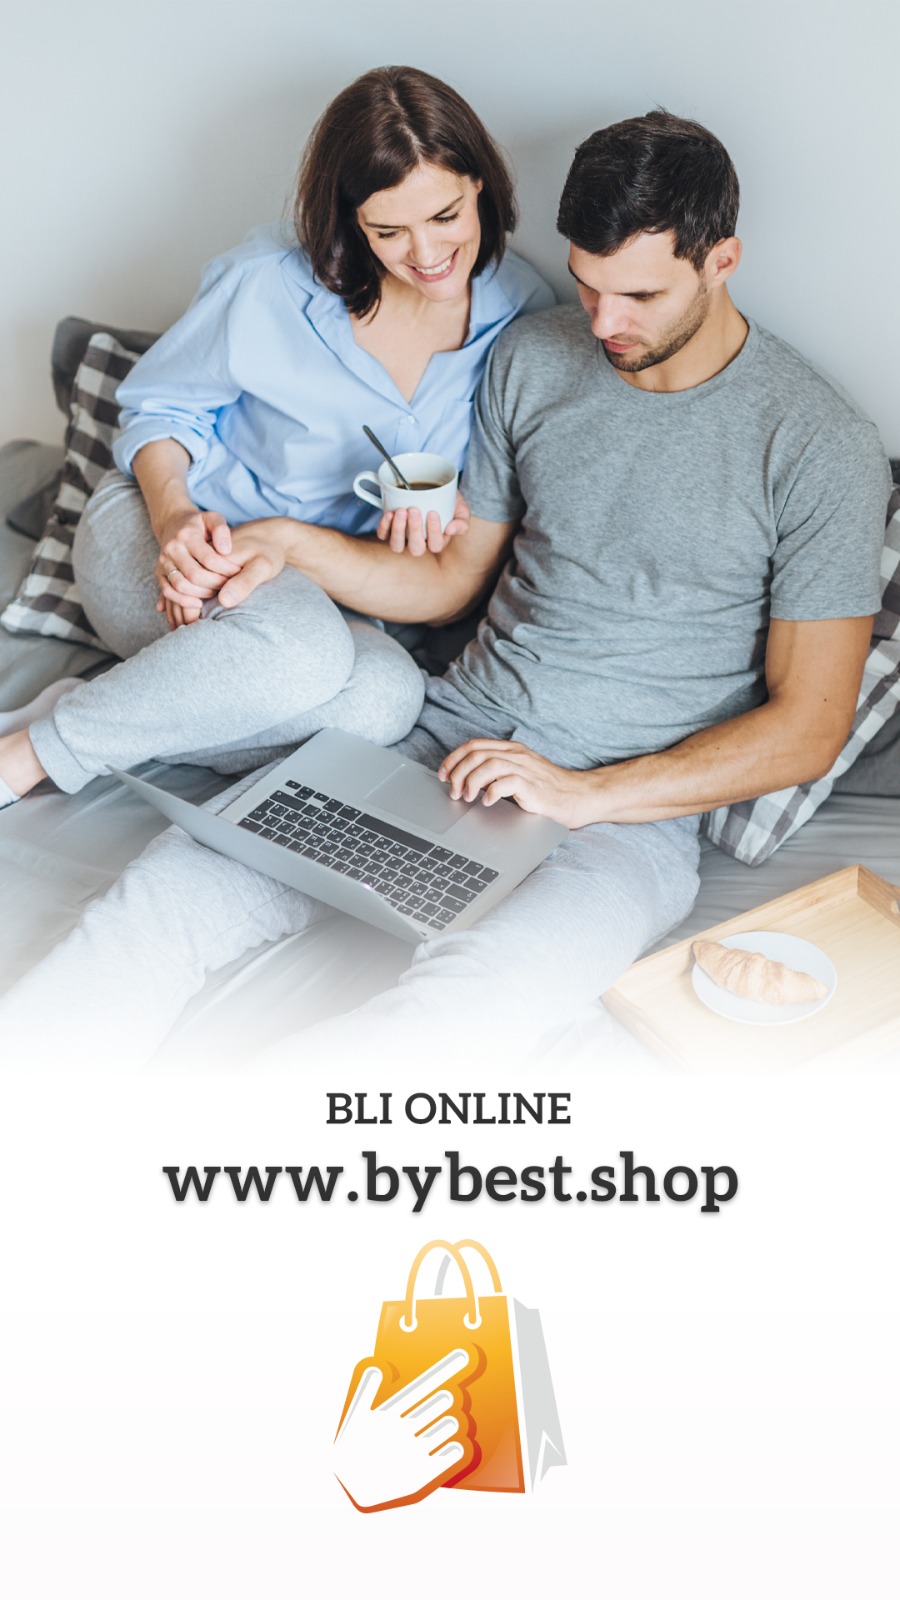 Shopping from the sofa at home, hurry to catch the super discounts at ByBest Shop!